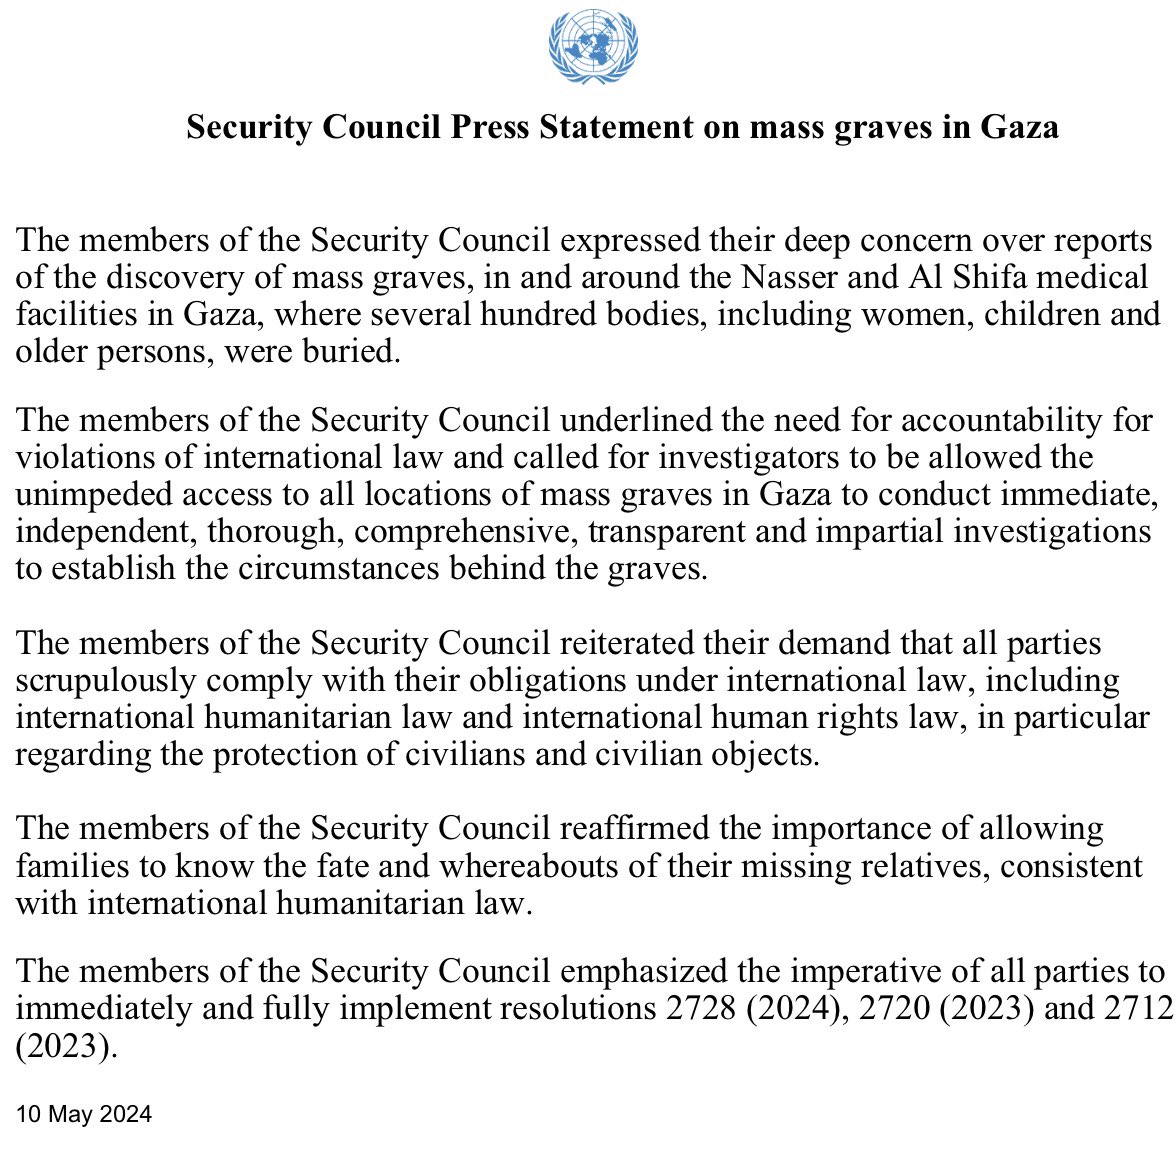 🇺🇳Security Council Press Statement #UNSC members expressed their deep concern over reports of the discovery of mass graves in & around Nasser & Al Shifa medical facilities in #Gaza & called for immediate, independent, transparent & impartial investigations. Full statement⬇️